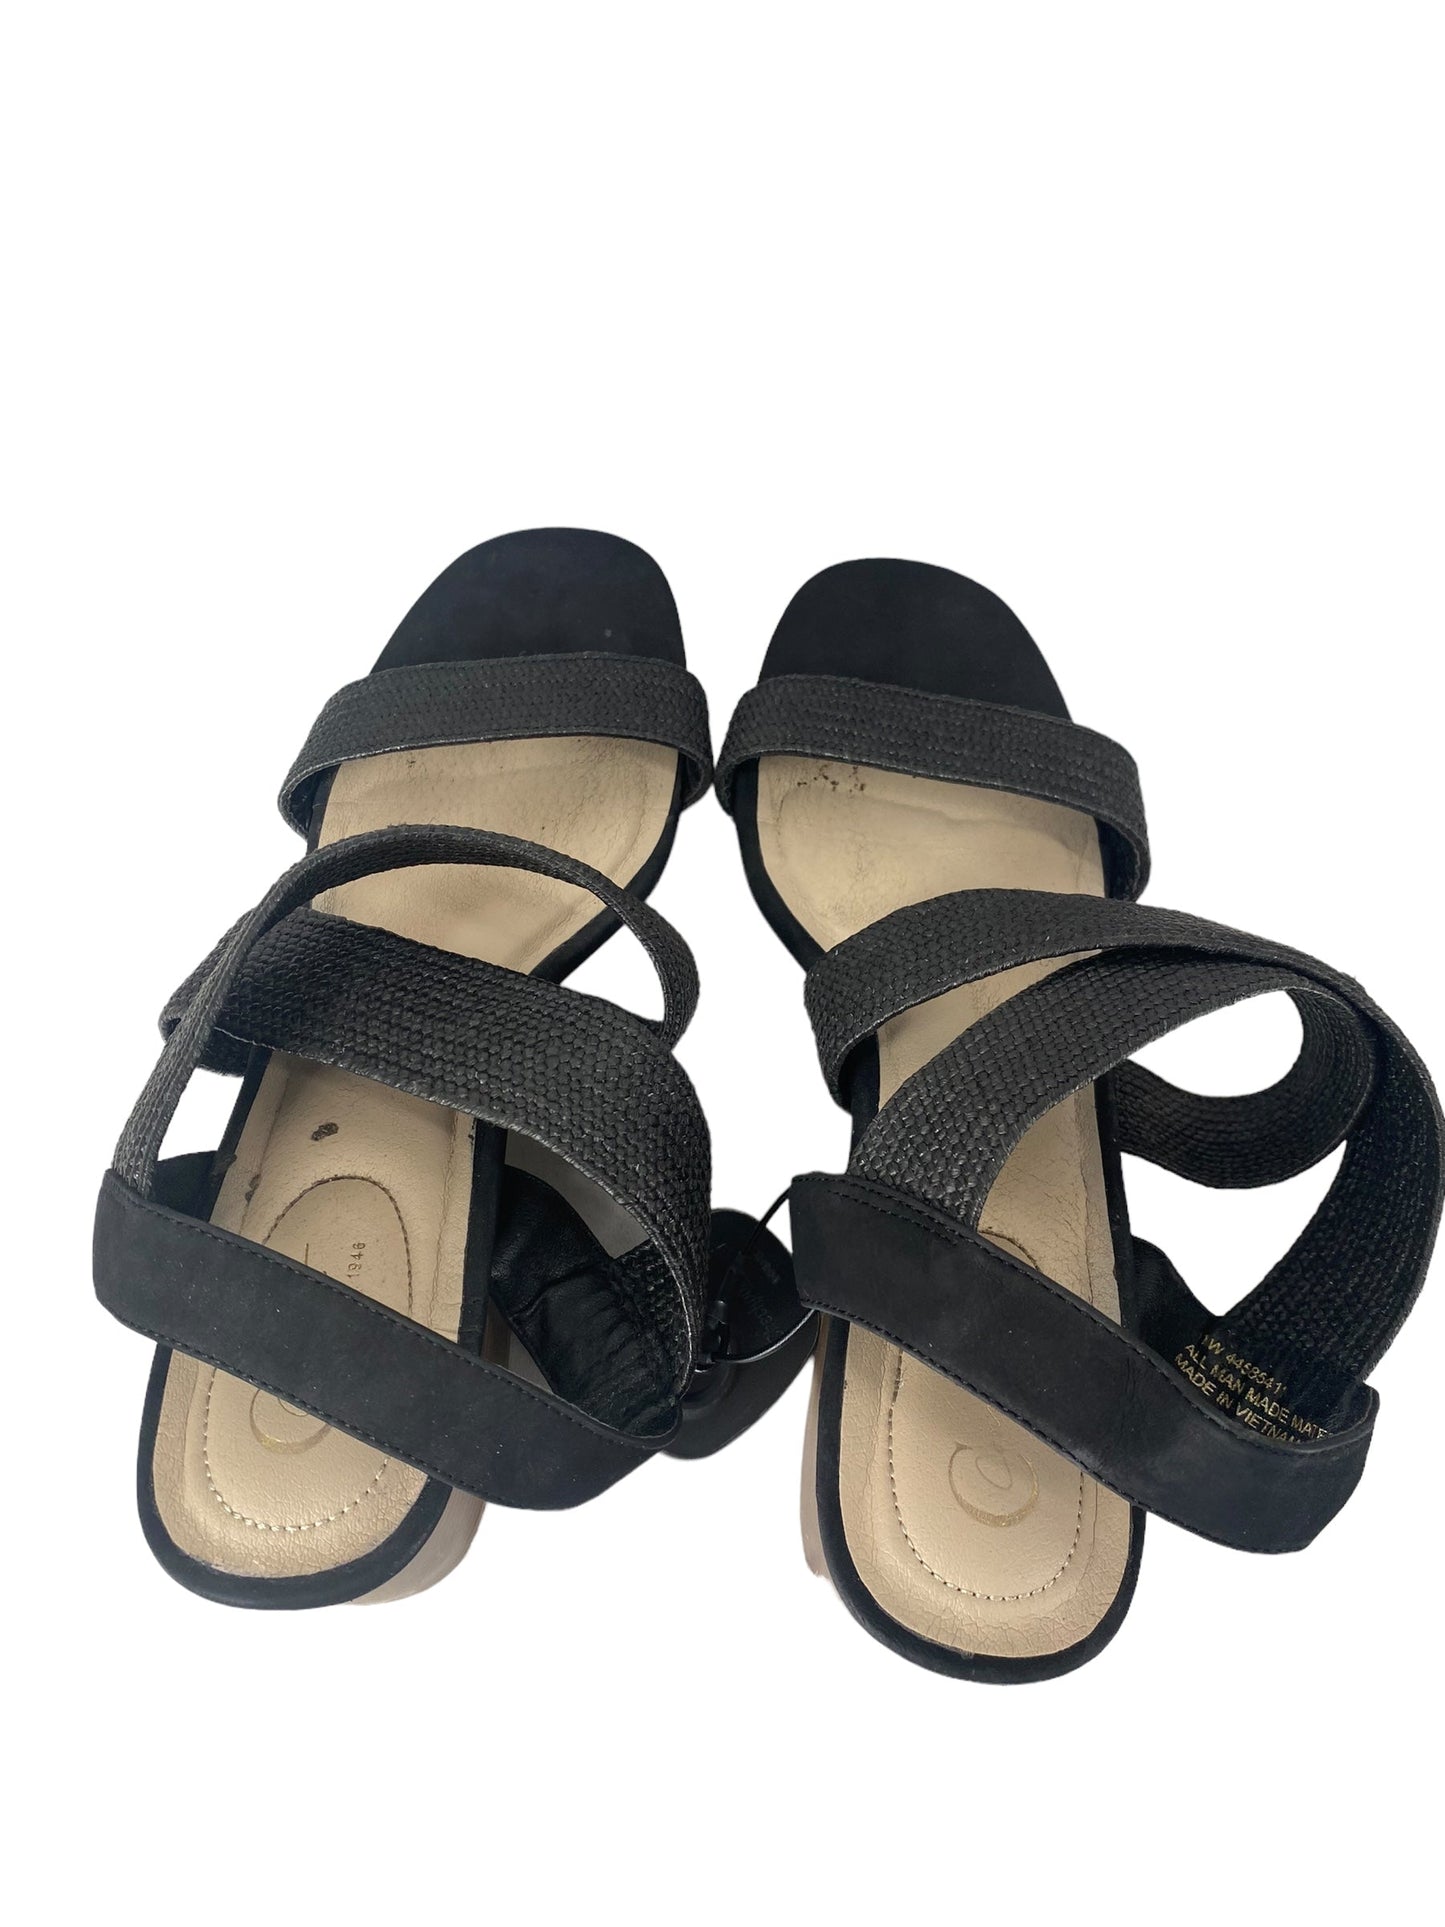 Sandals Heels Block By Cato  Size: 11